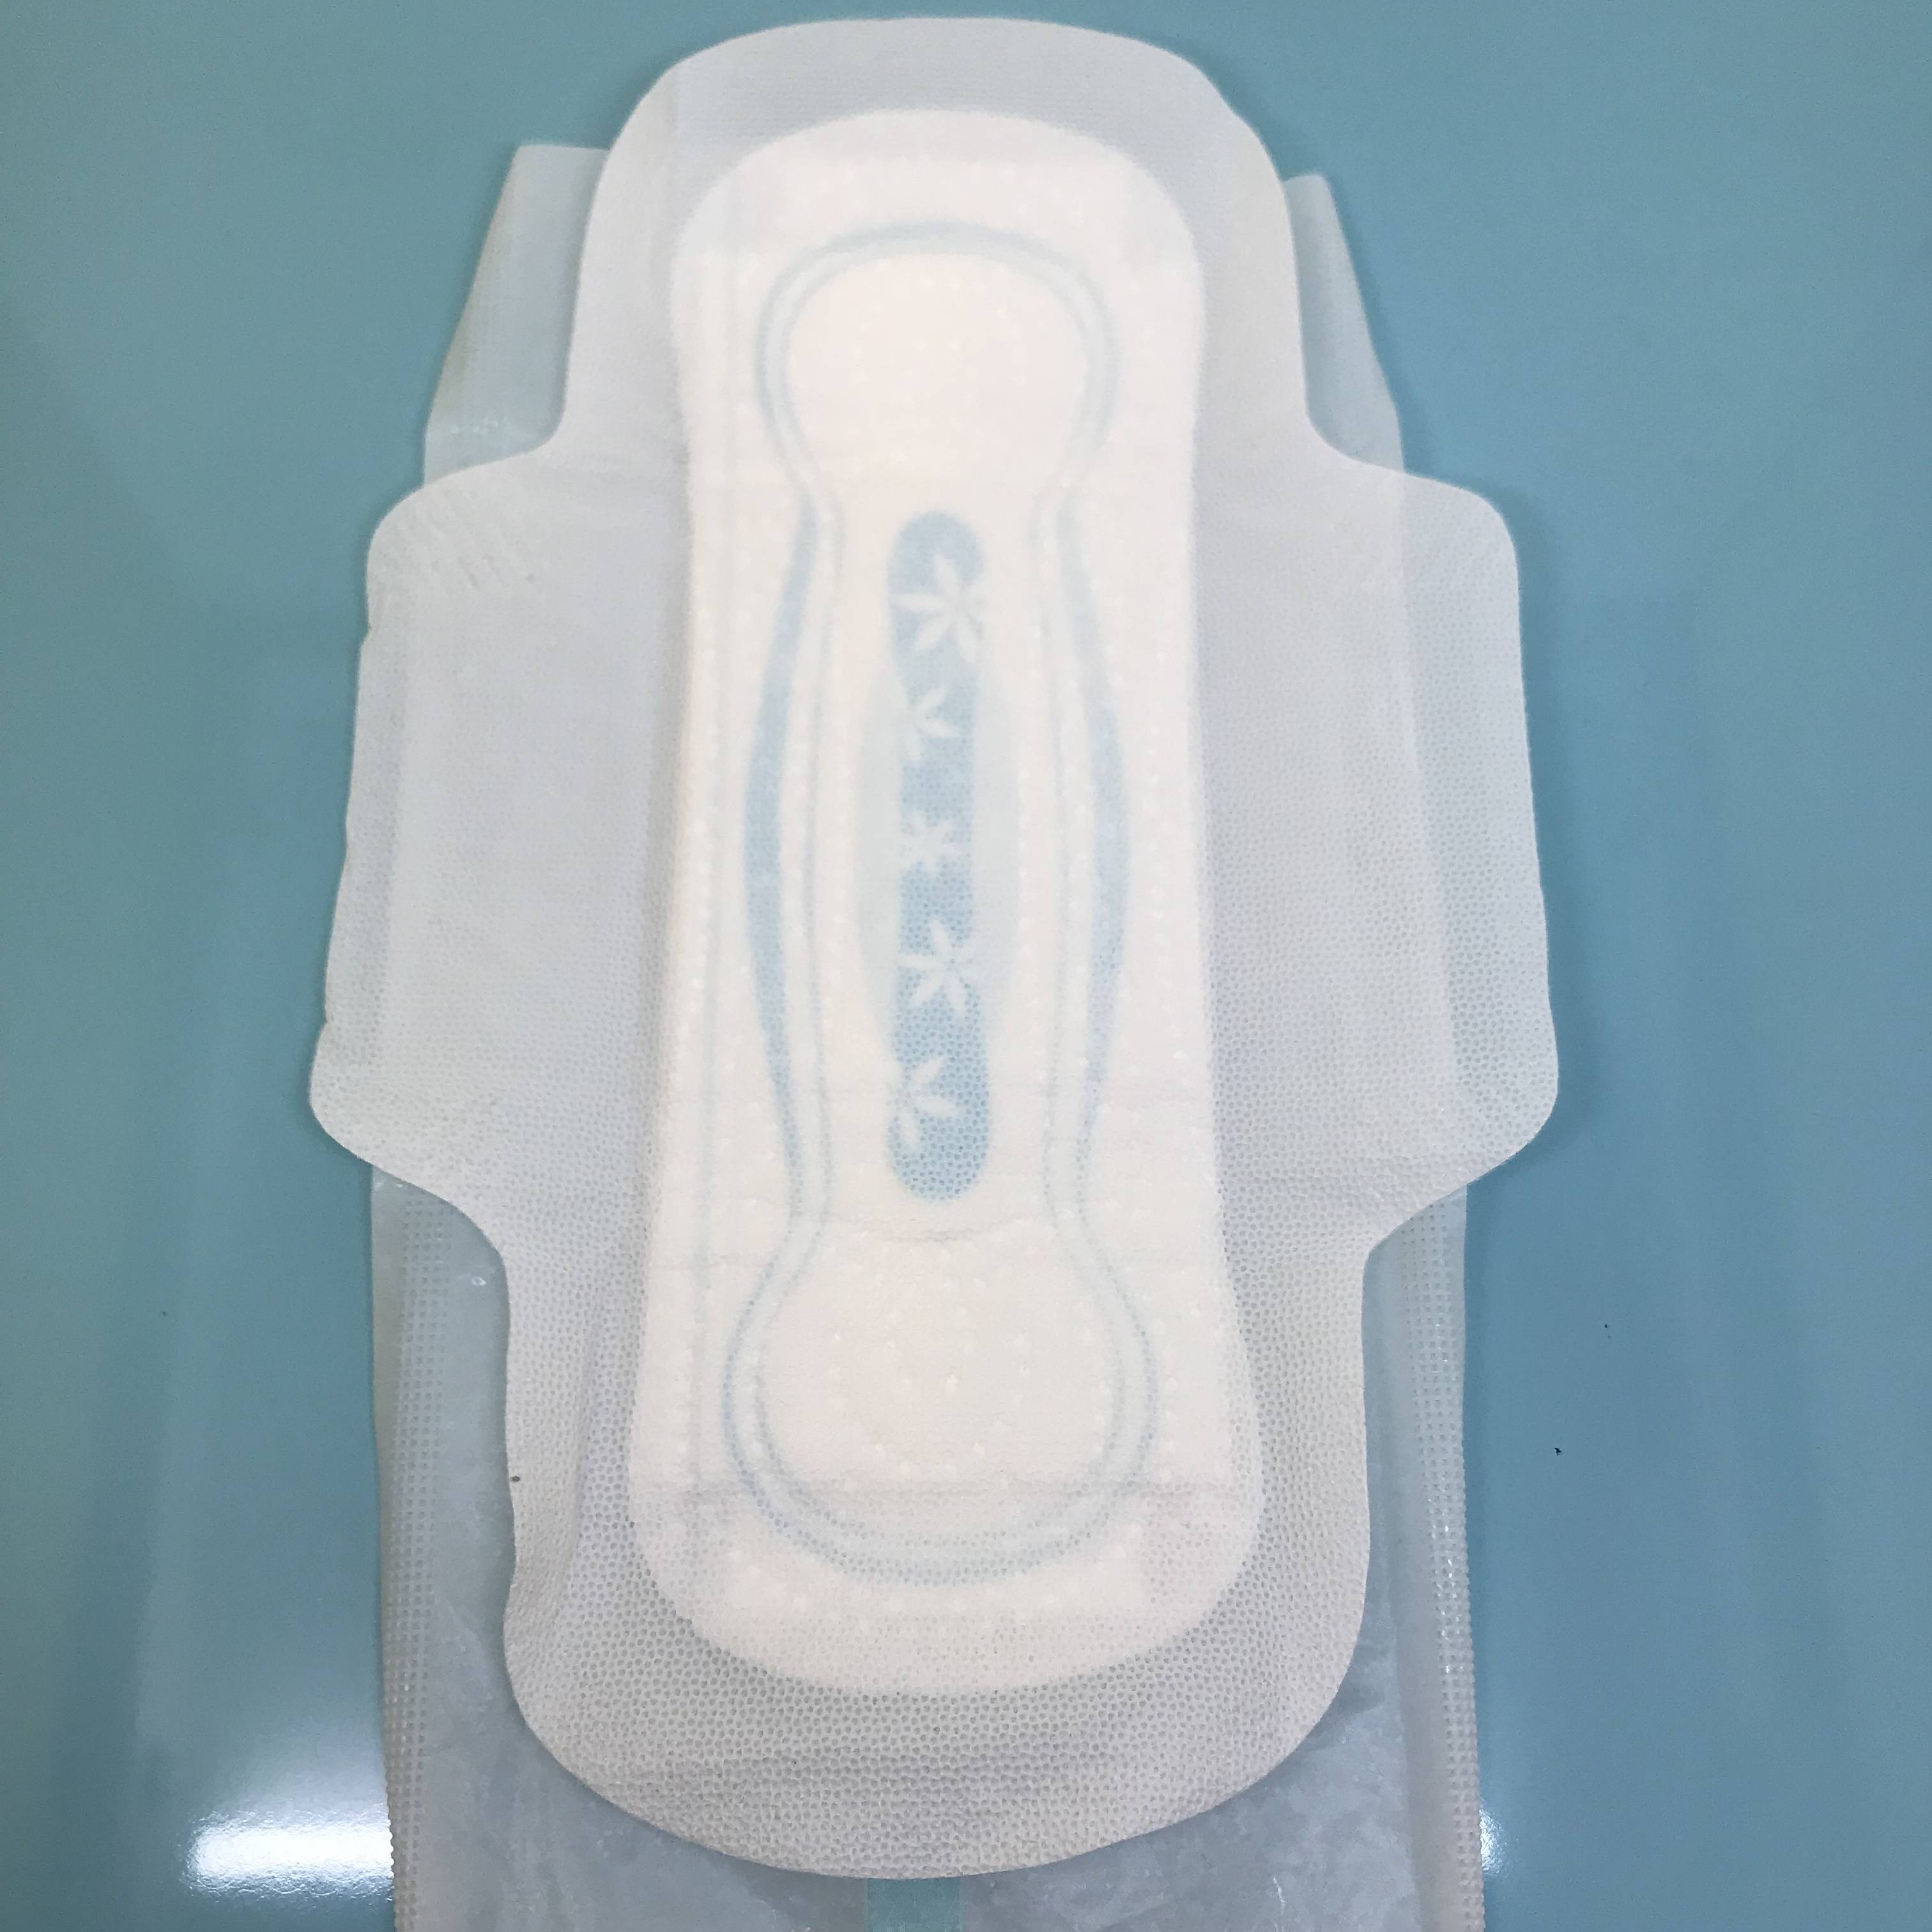 2021 China New Design Longrich Pad Sanitary Napkins - Soft touch cotton young girl sanitary napkin Quanzhou manufacturer – Union Paper